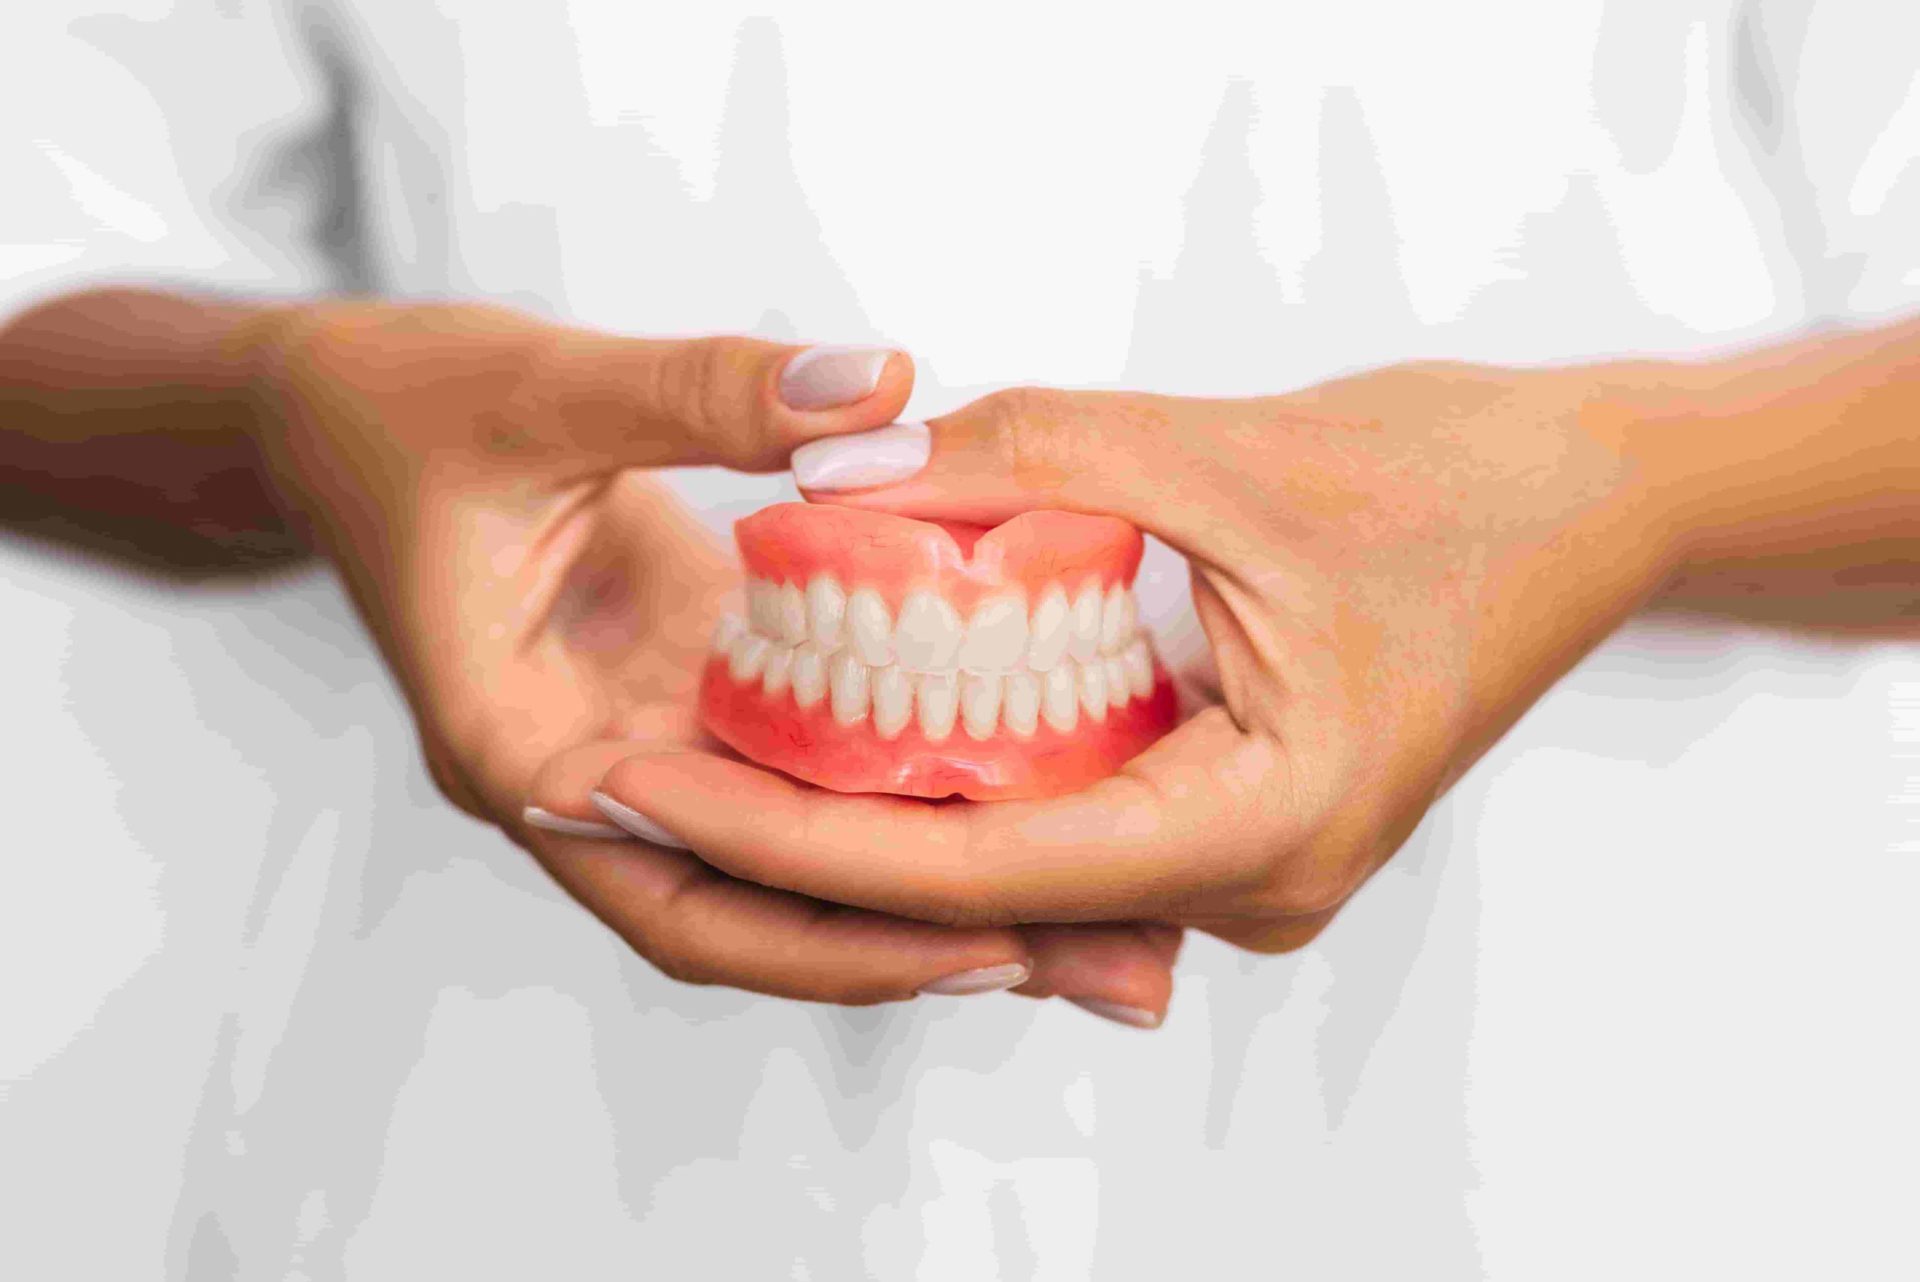 front view of complete denture dentistry conceptu 2022 02 02 20 37 09 utc scaled